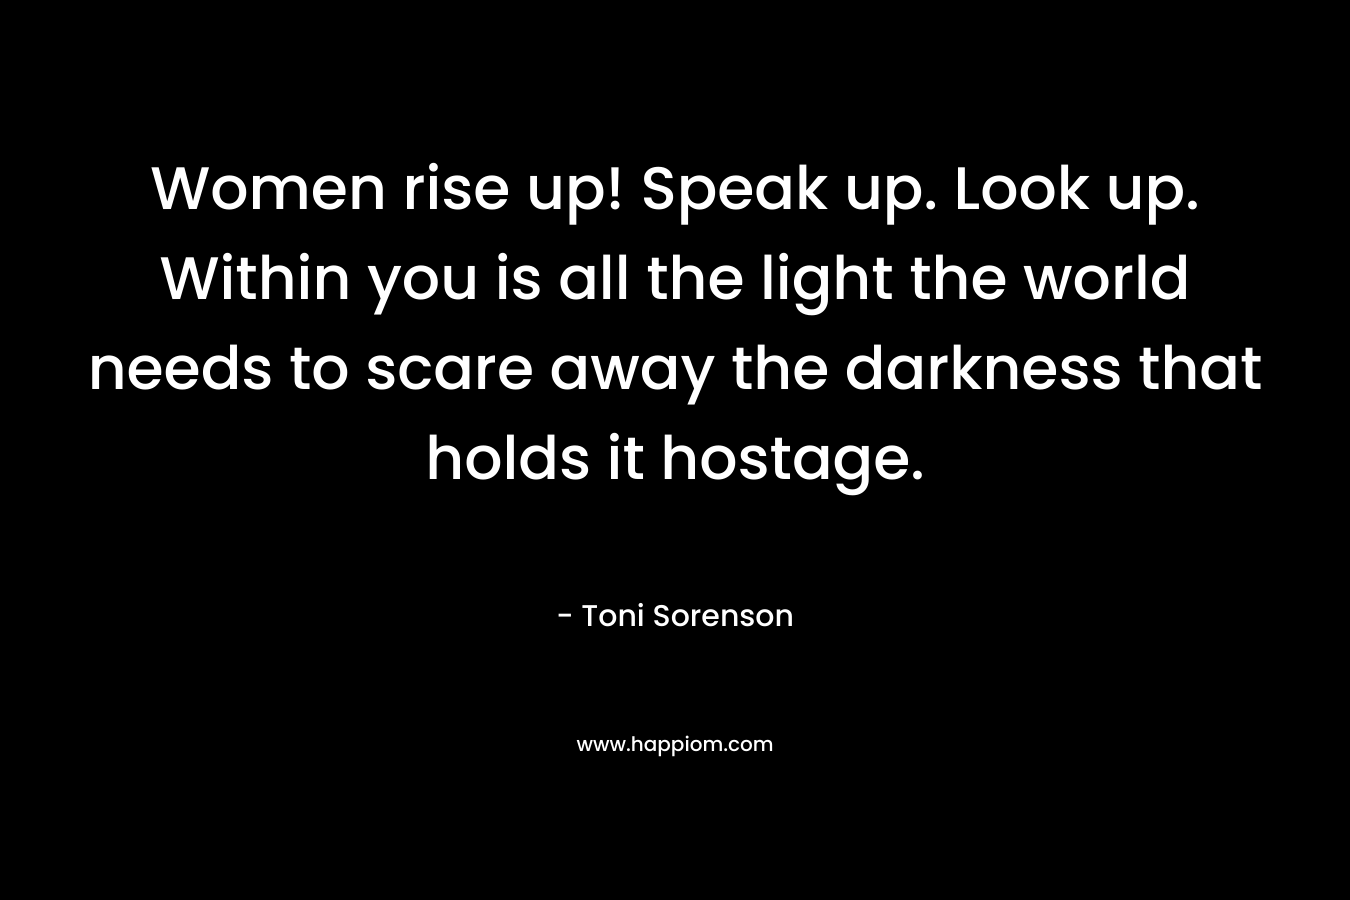 Women rise up! Speak up. Look up. Within you is all the light the world needs to scare away the darkness that holds it hostage. – Toni Sorenson